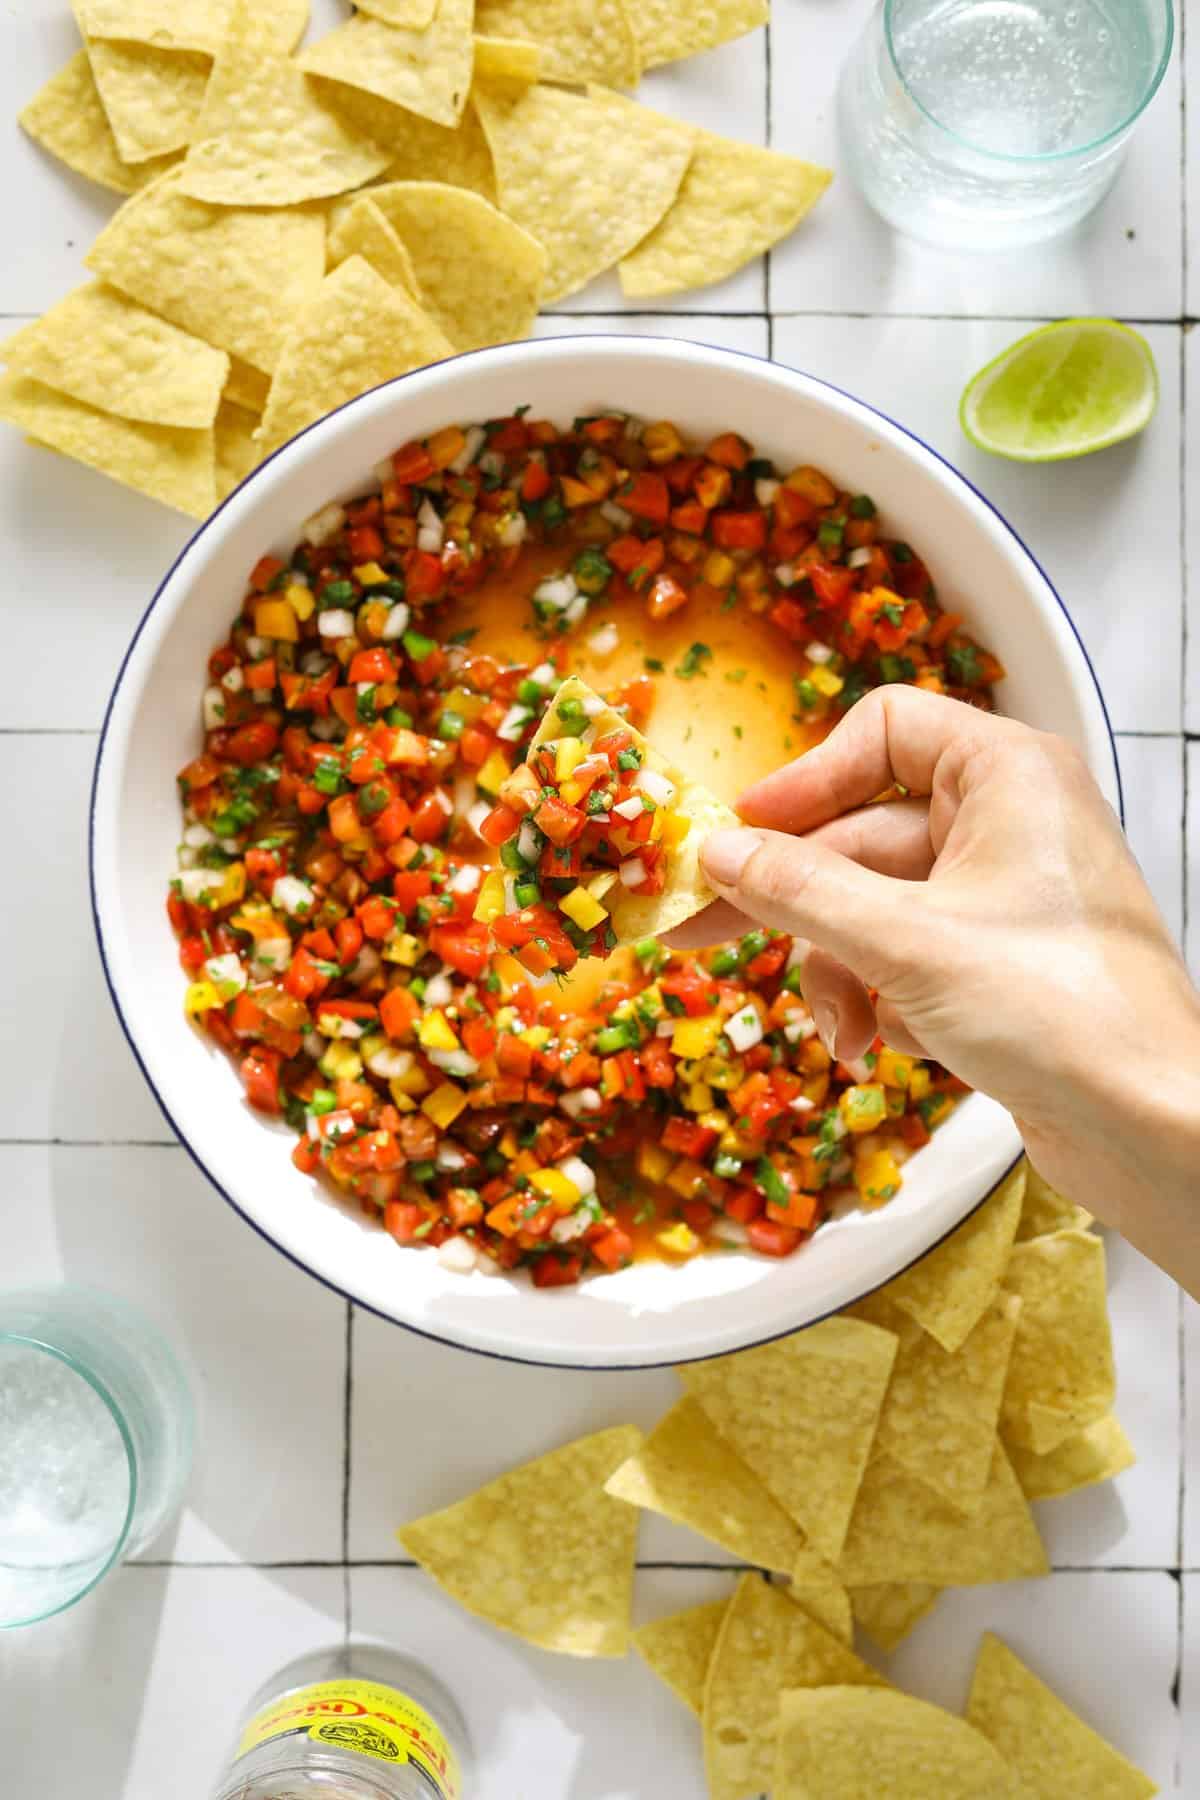 A white and blue enamel bowl filled with salsa and a hand holding a chip filled with salsa.